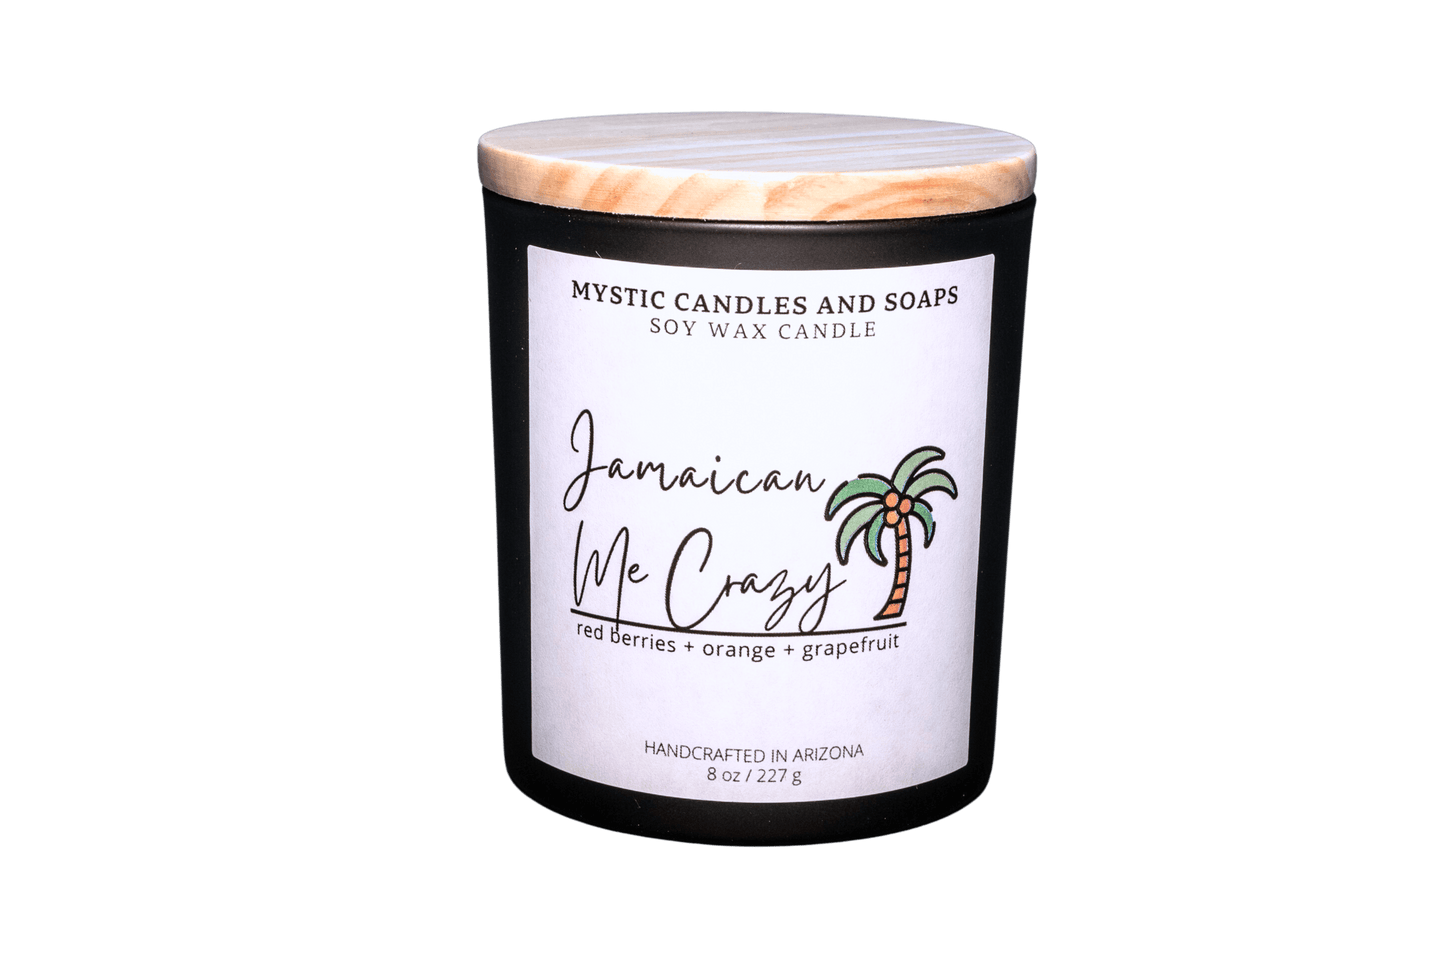 Jamaican Me Crazy soy wax Scented Candle